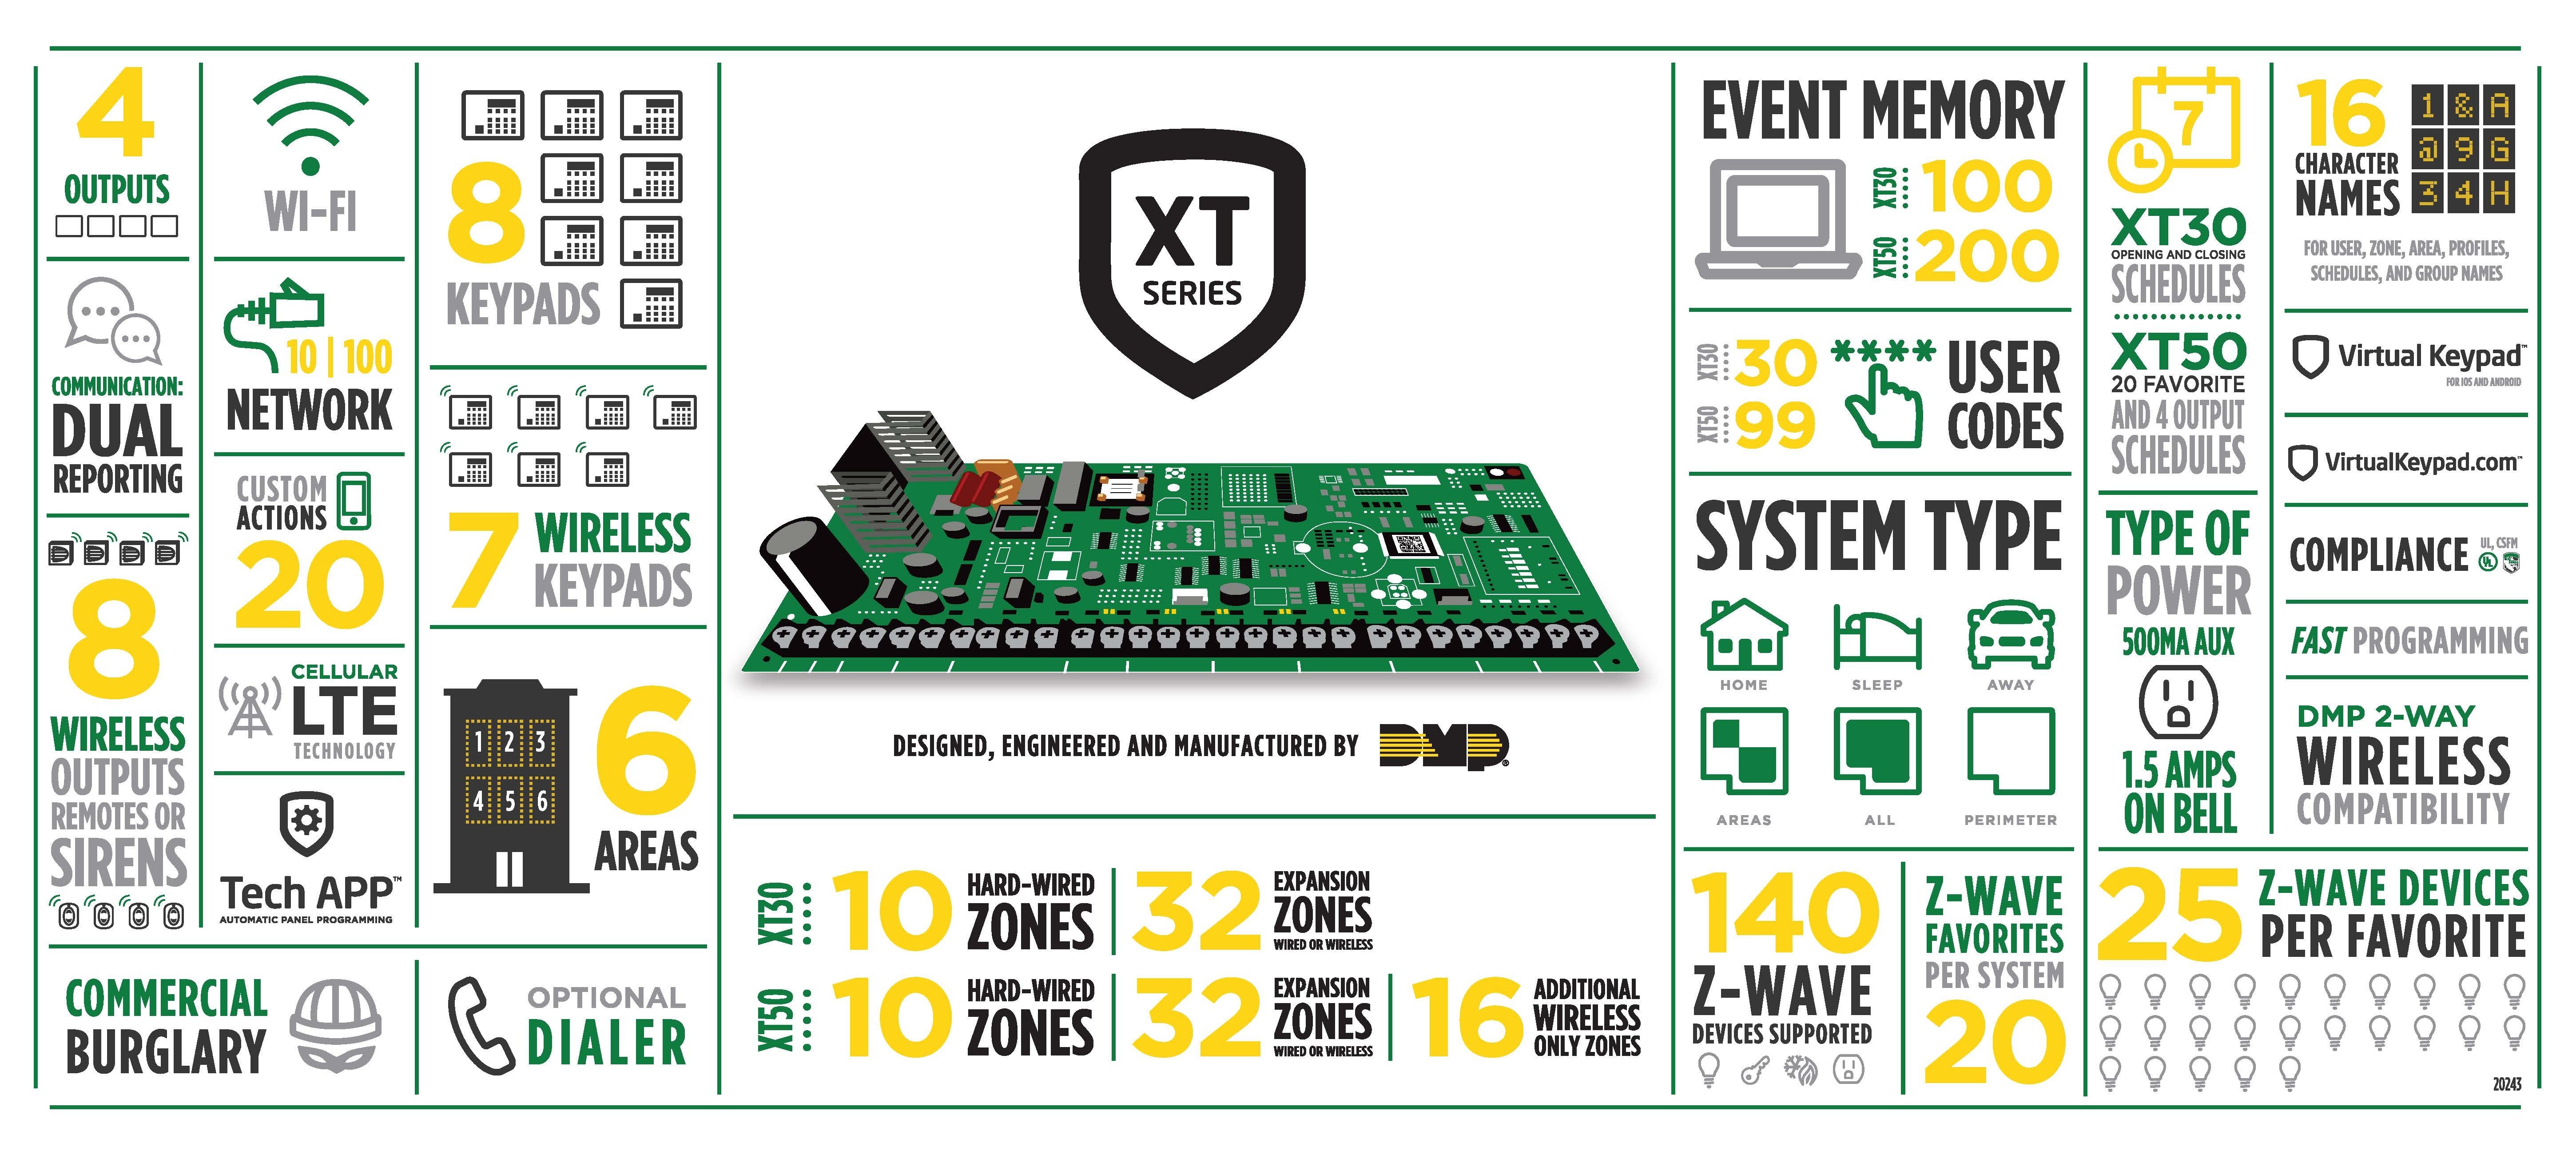 XT Series Feature Infographic